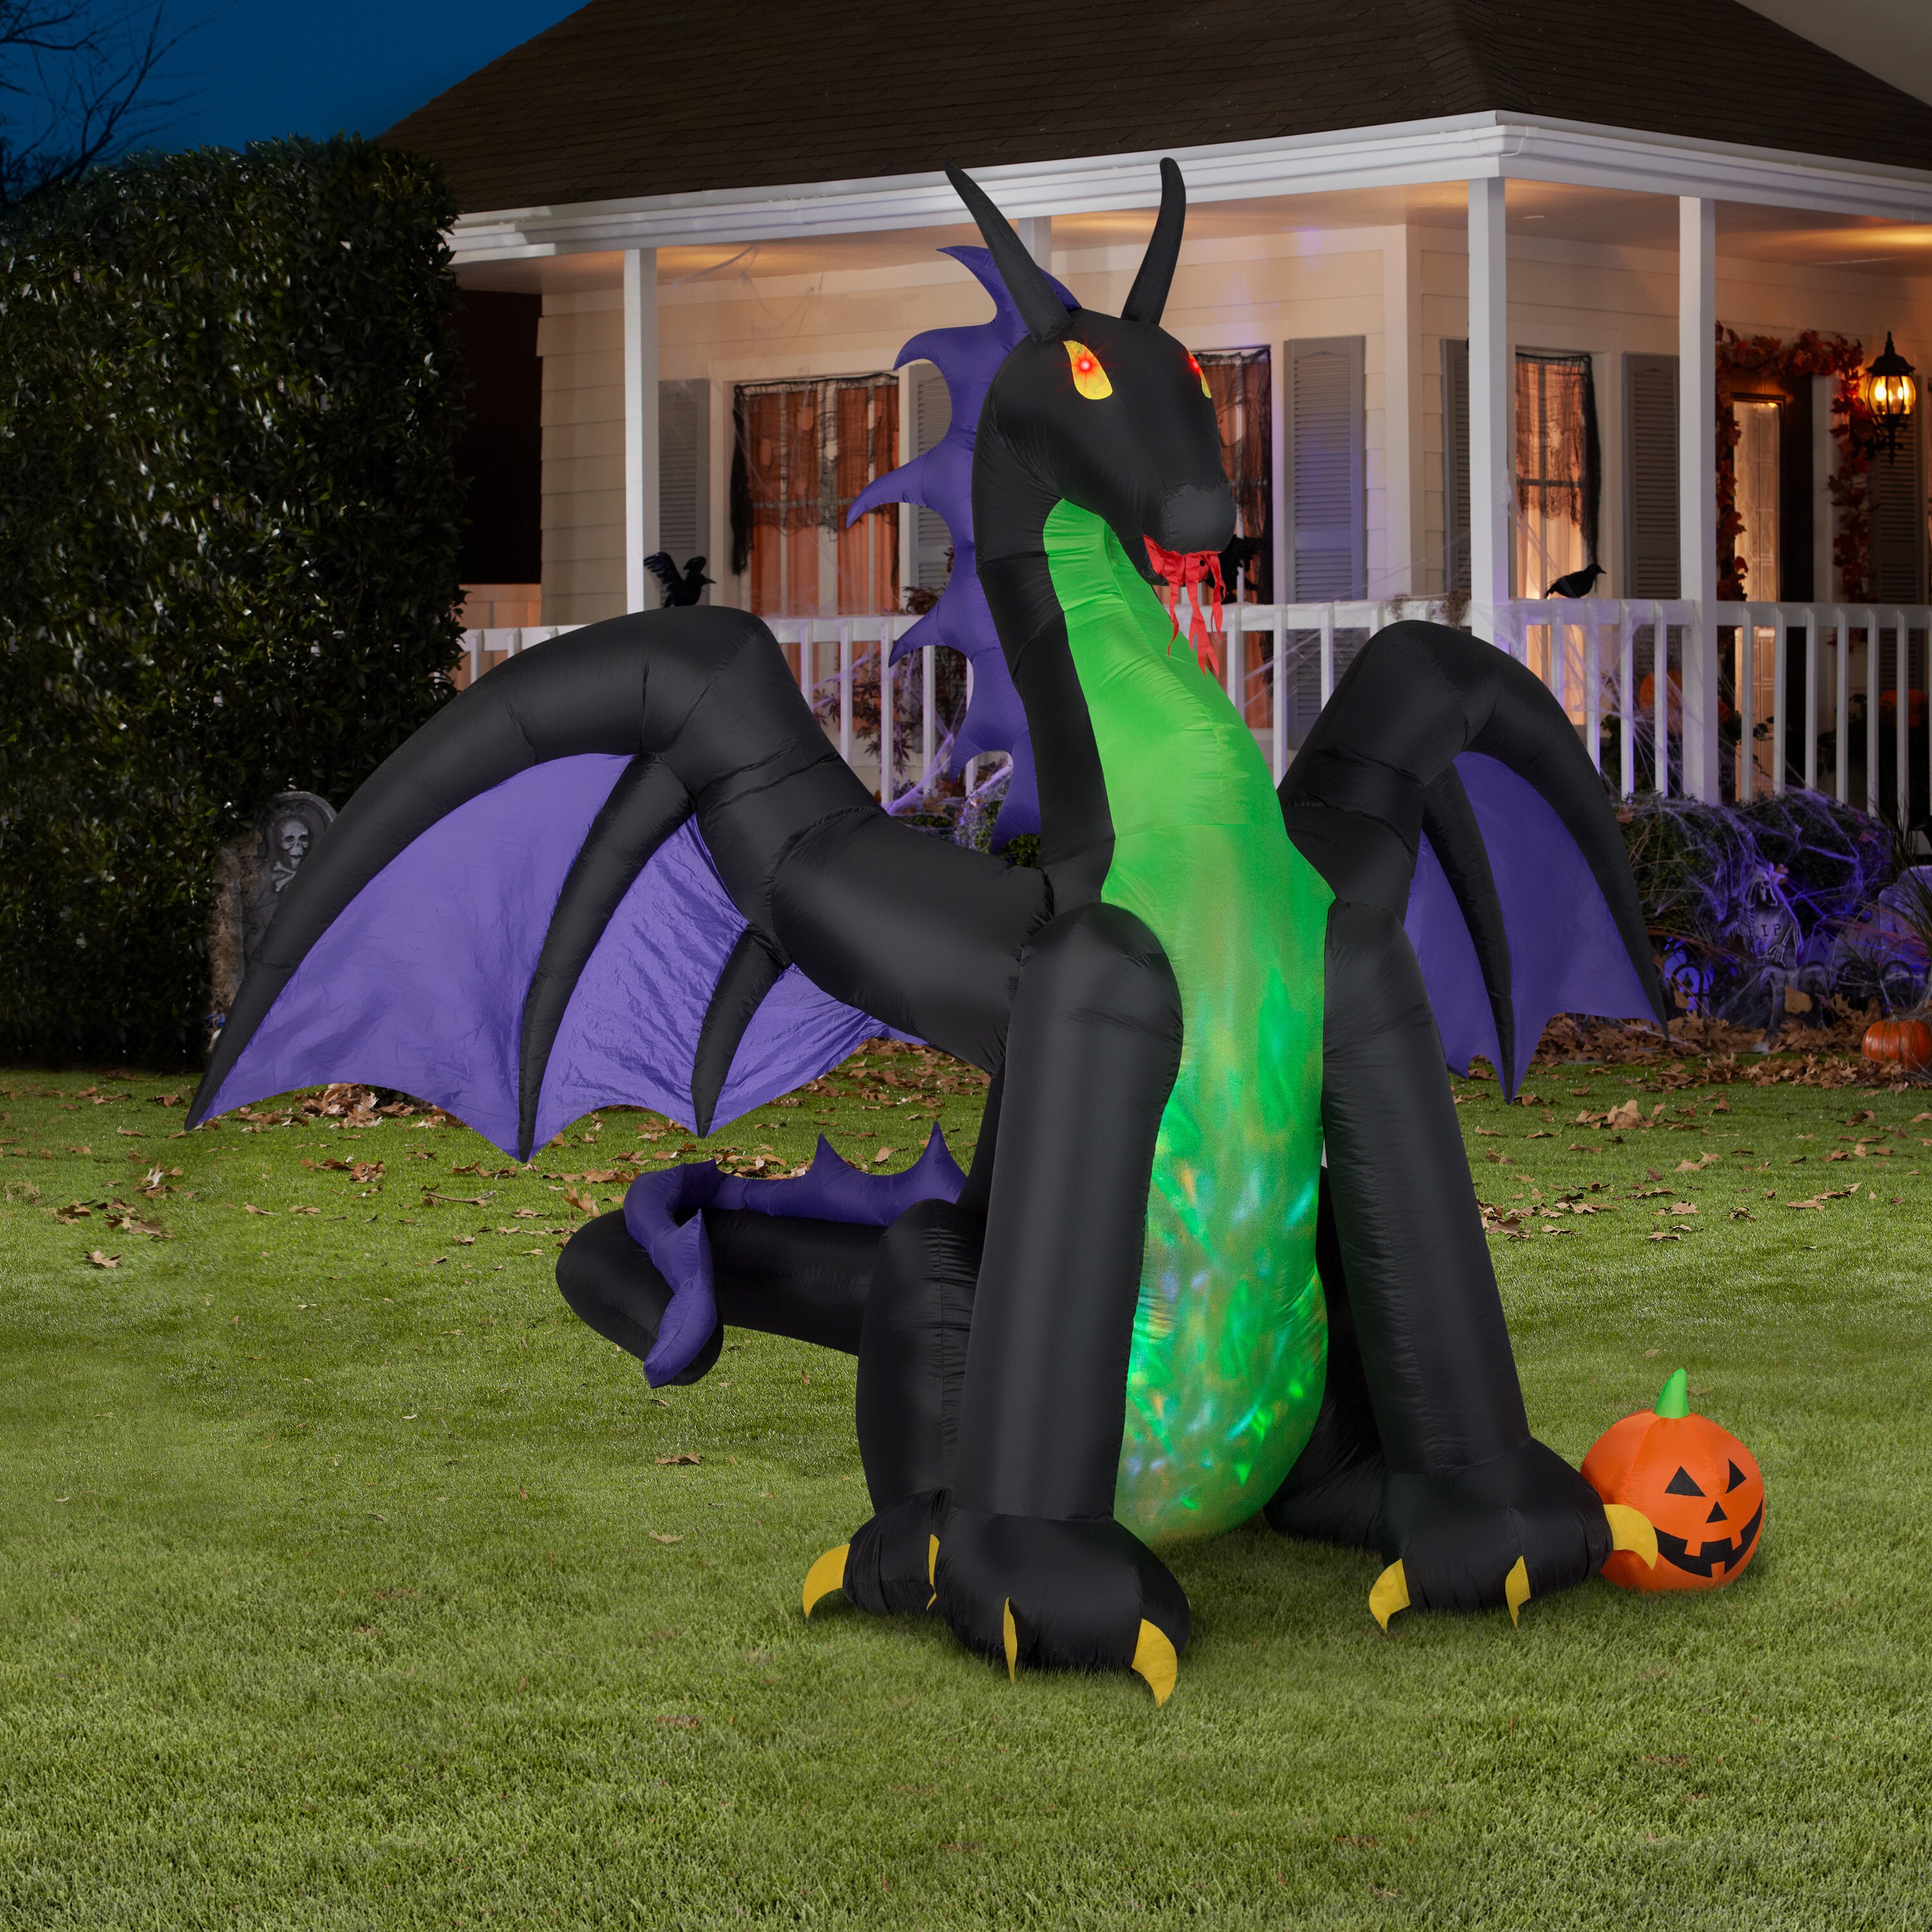 Gemmy Details About 12 Inflatable Dragon with Color Changing and Moving Head Indoor/Outdoor Holiday Decoration 